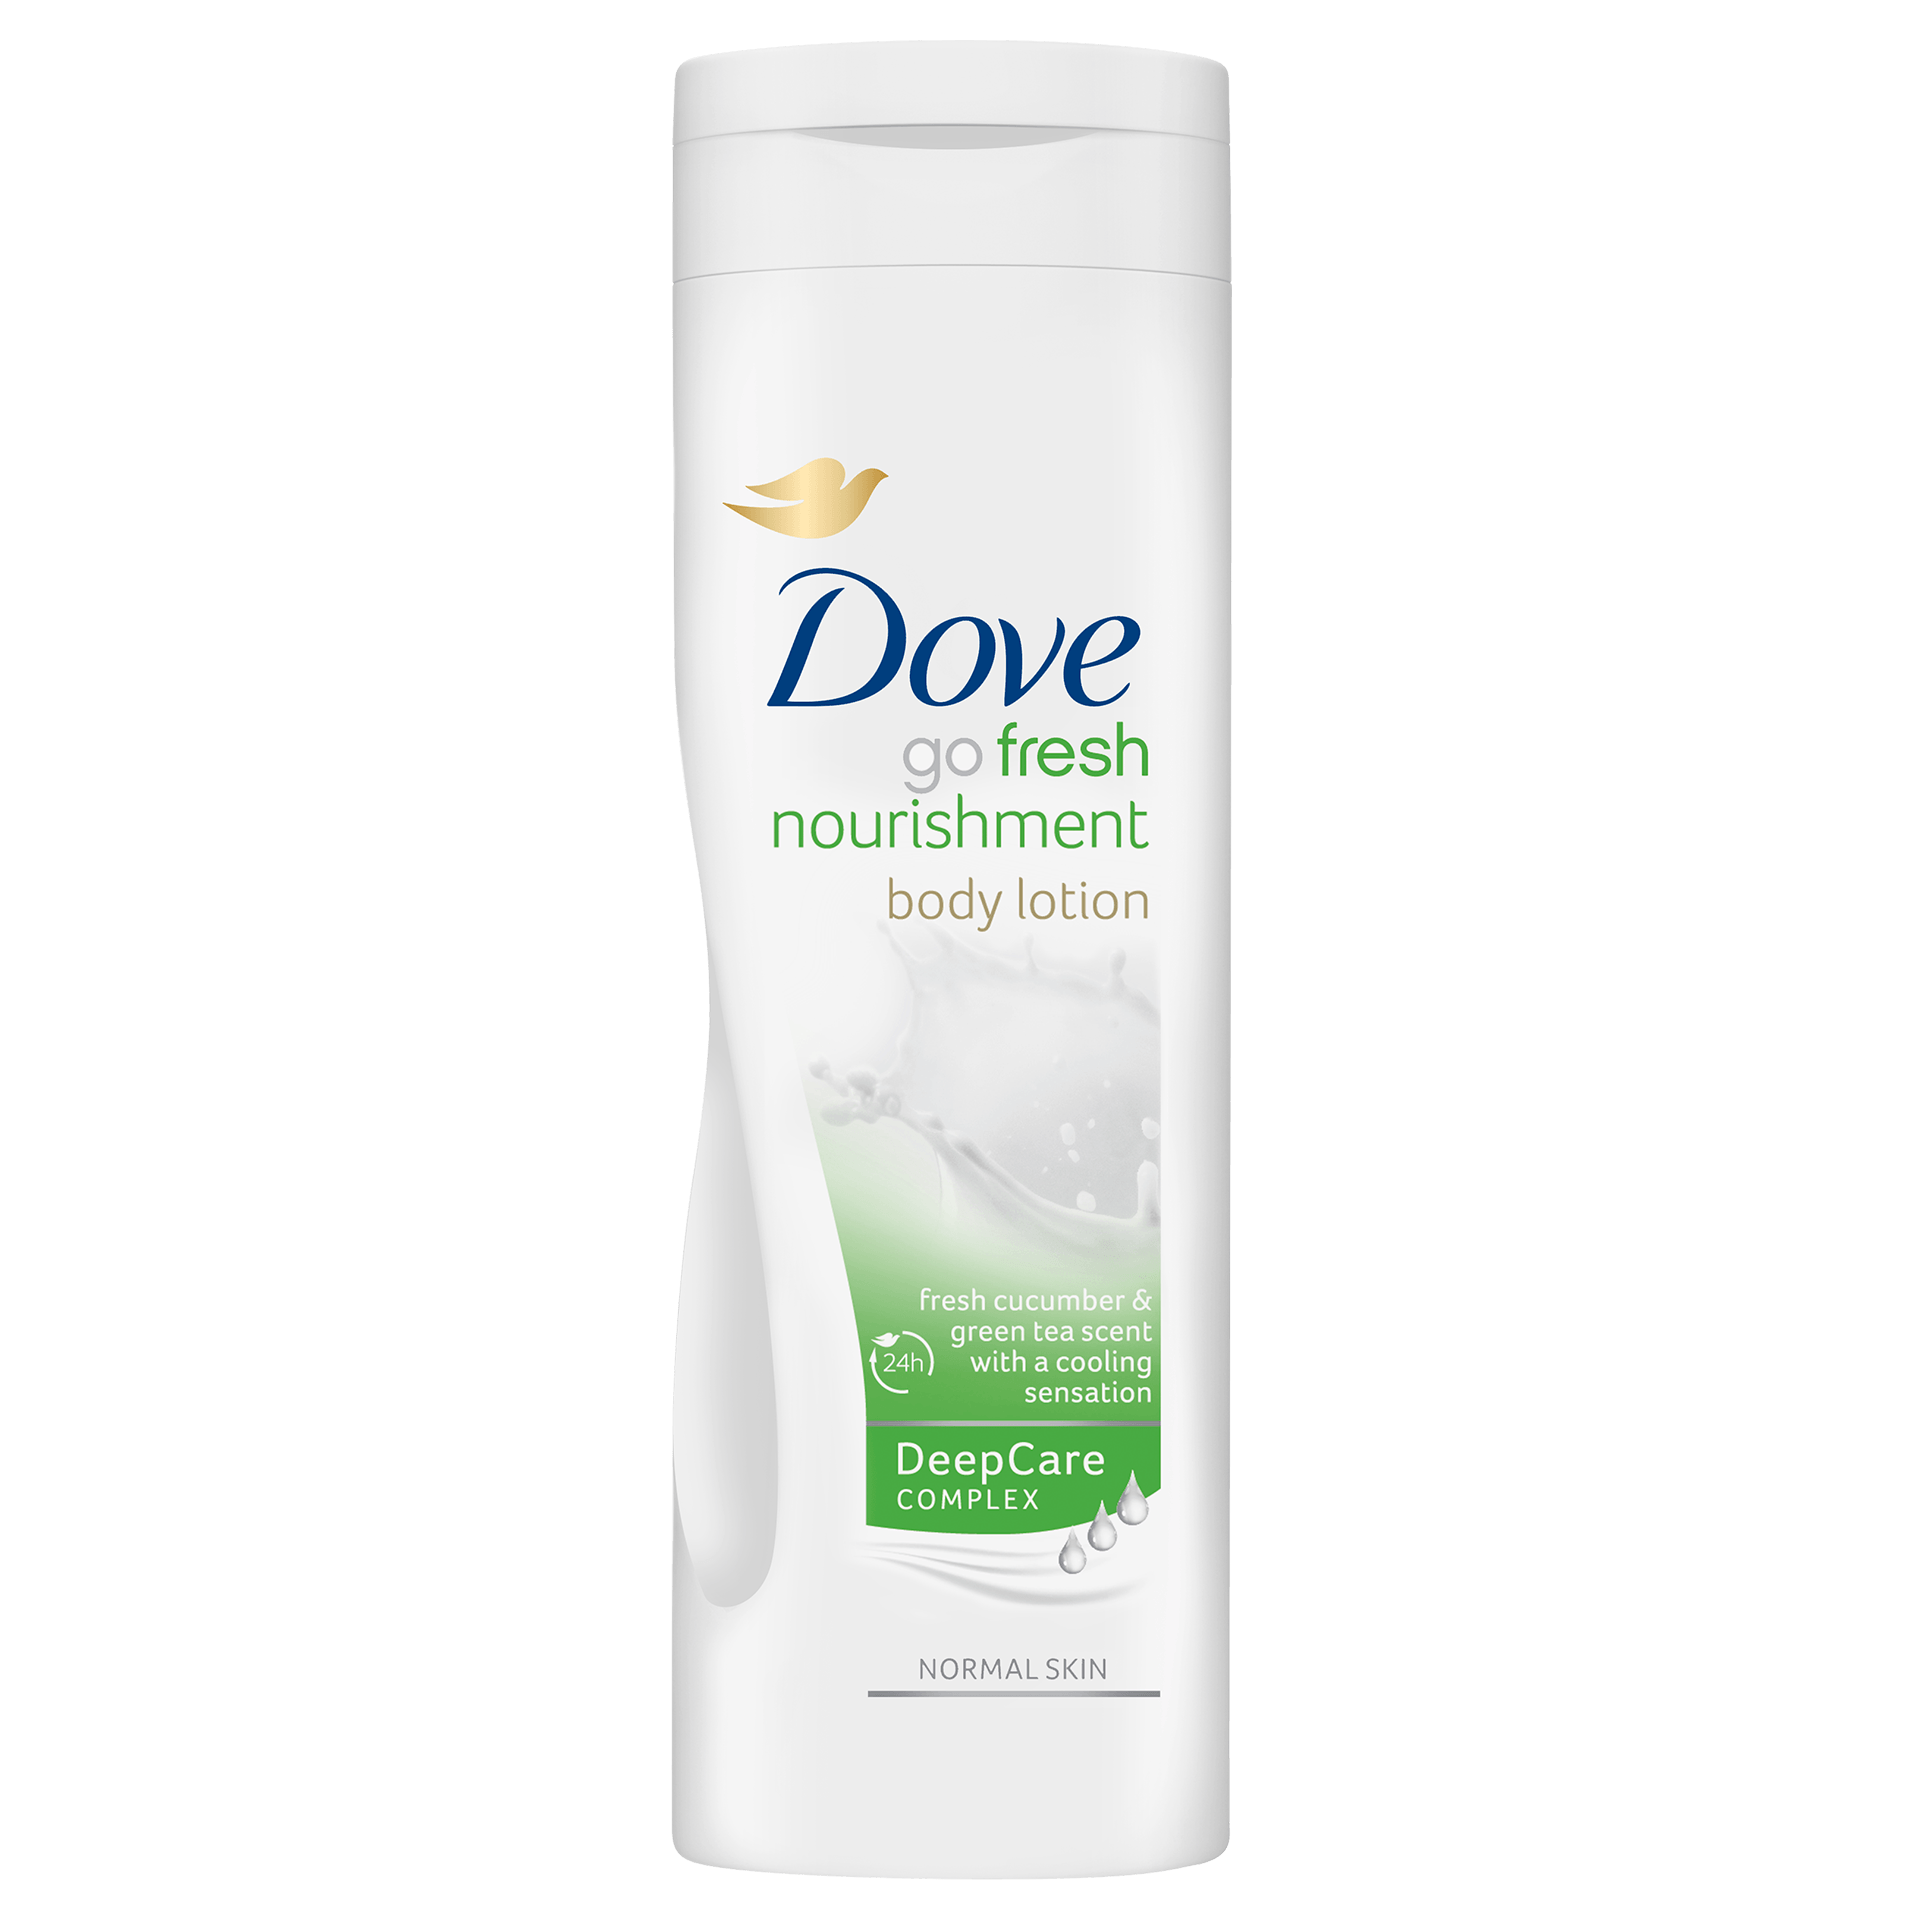 Dove Fresh Nourishment Body Lotion one of the best moisturizers for dry skin - 2020(india)